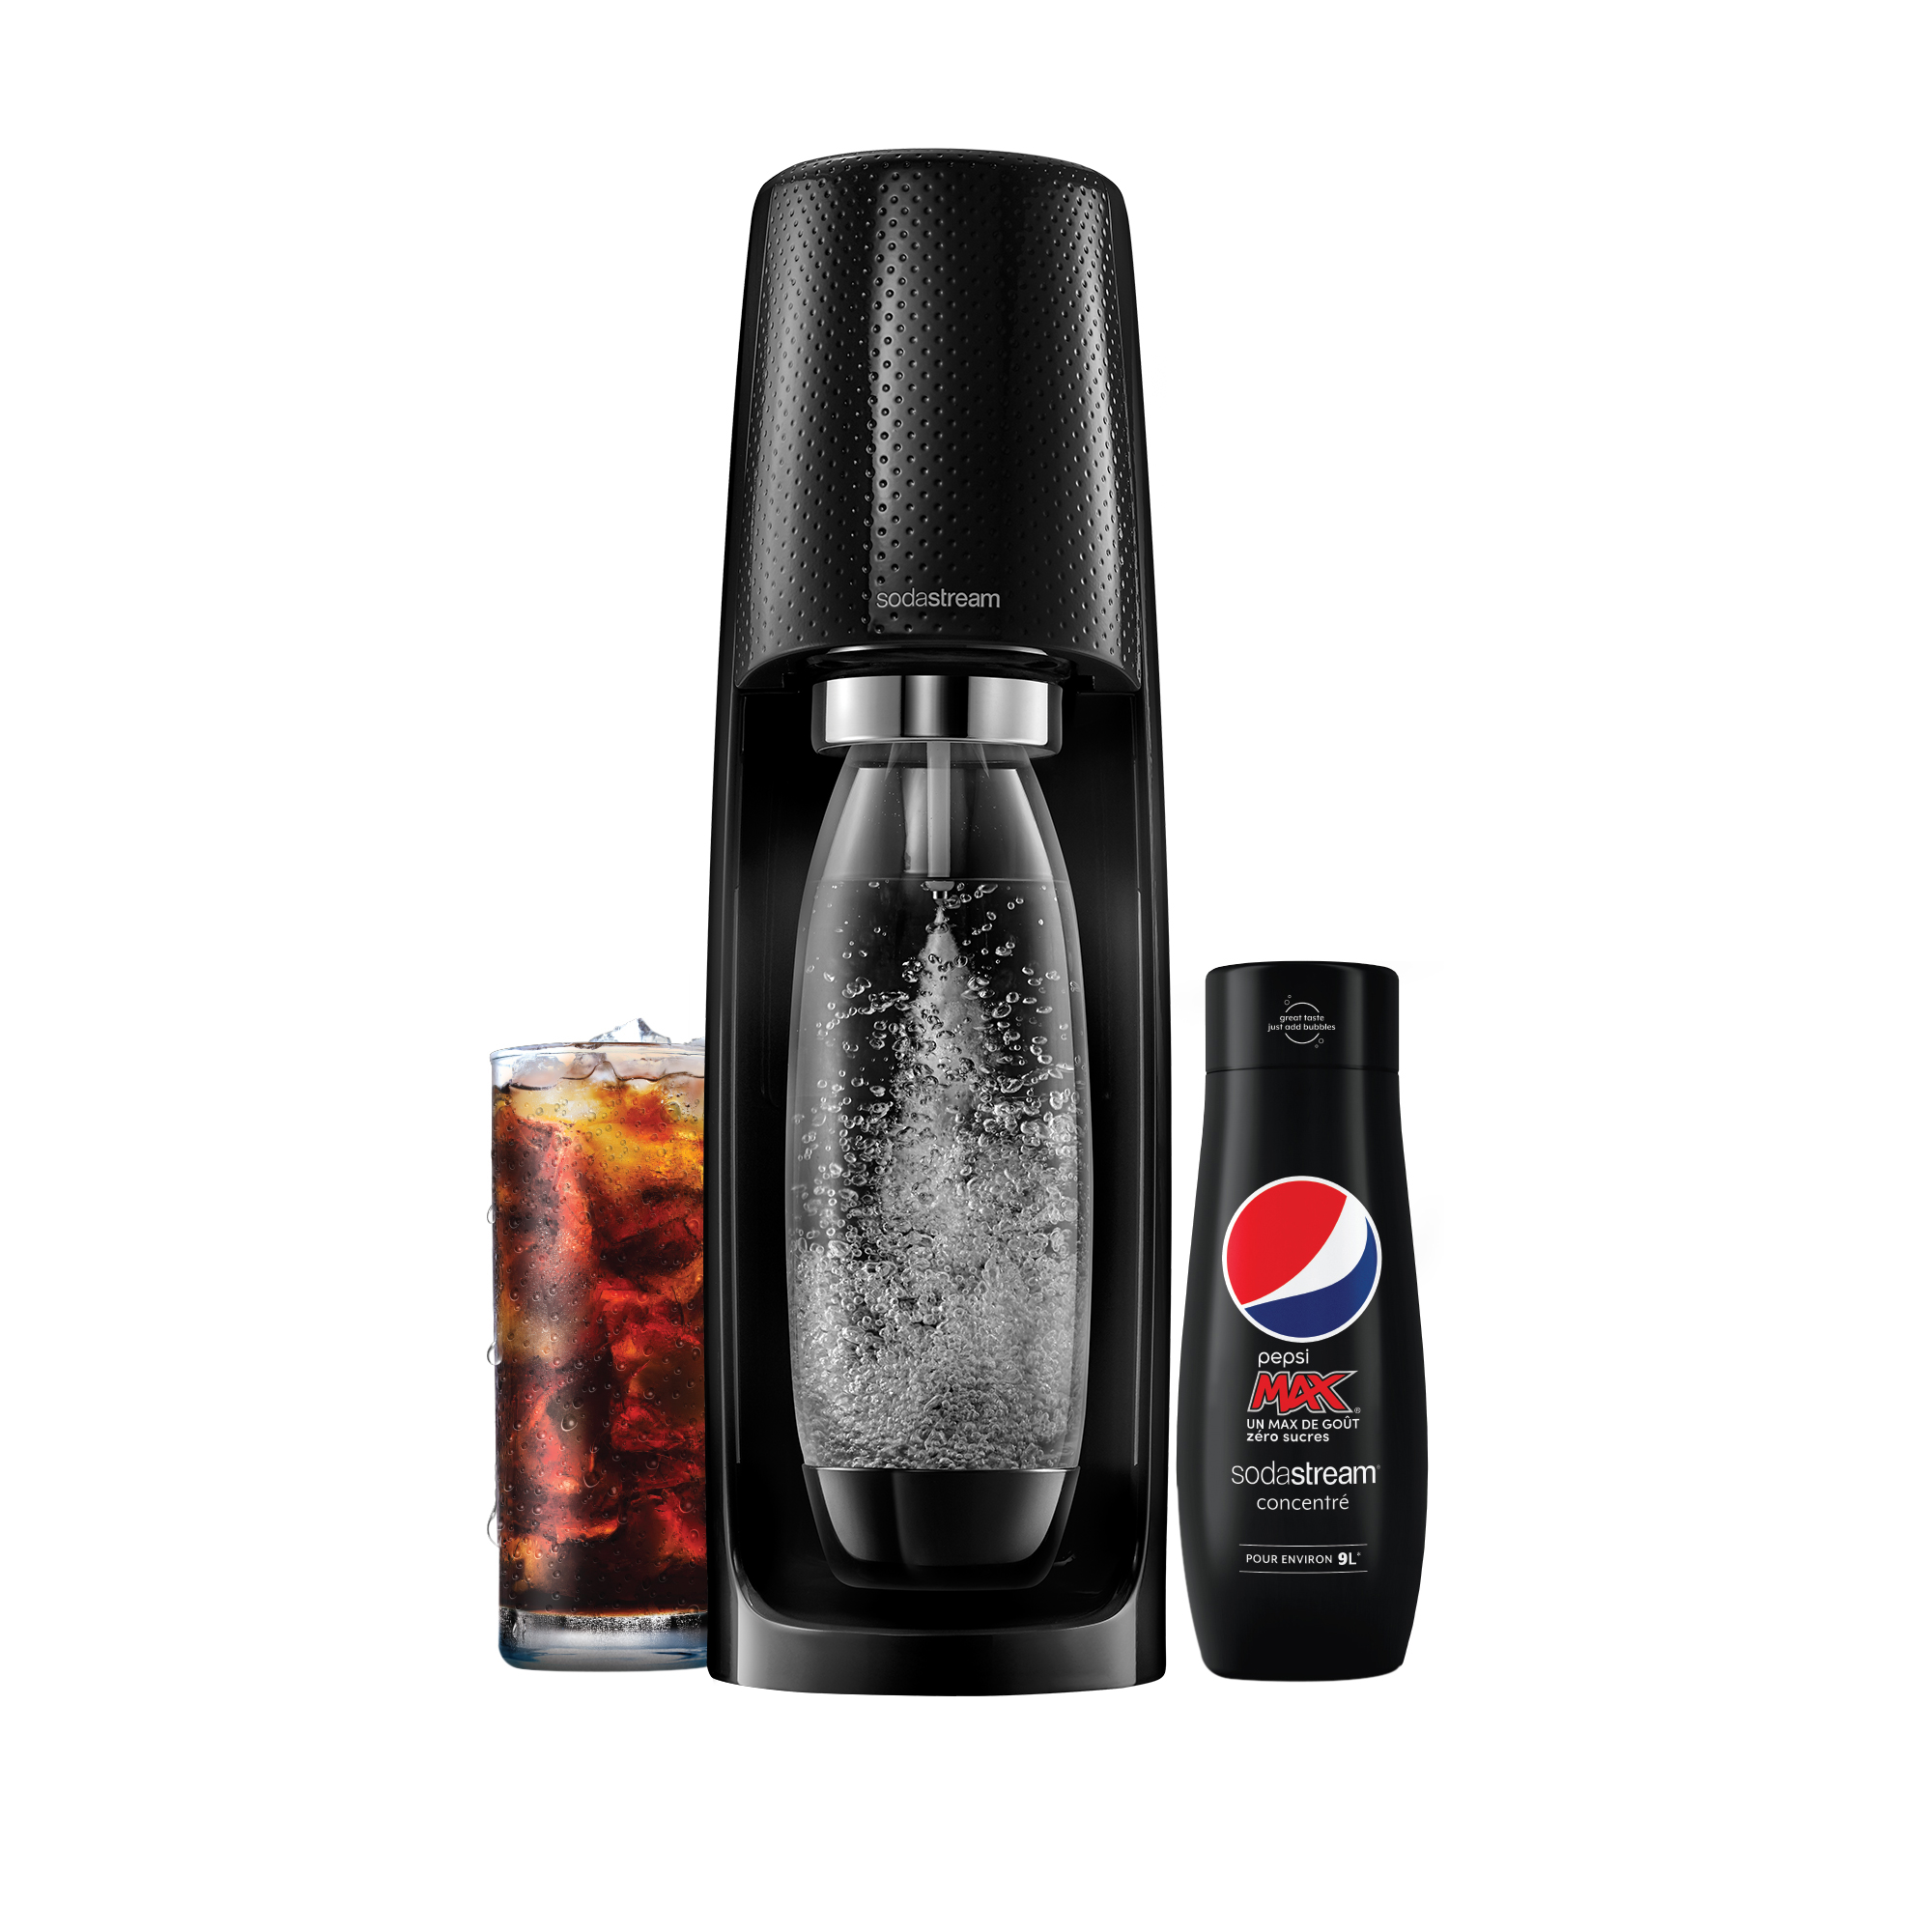 New SodaStream fountain with pepsi syrup, Christmas must-haves